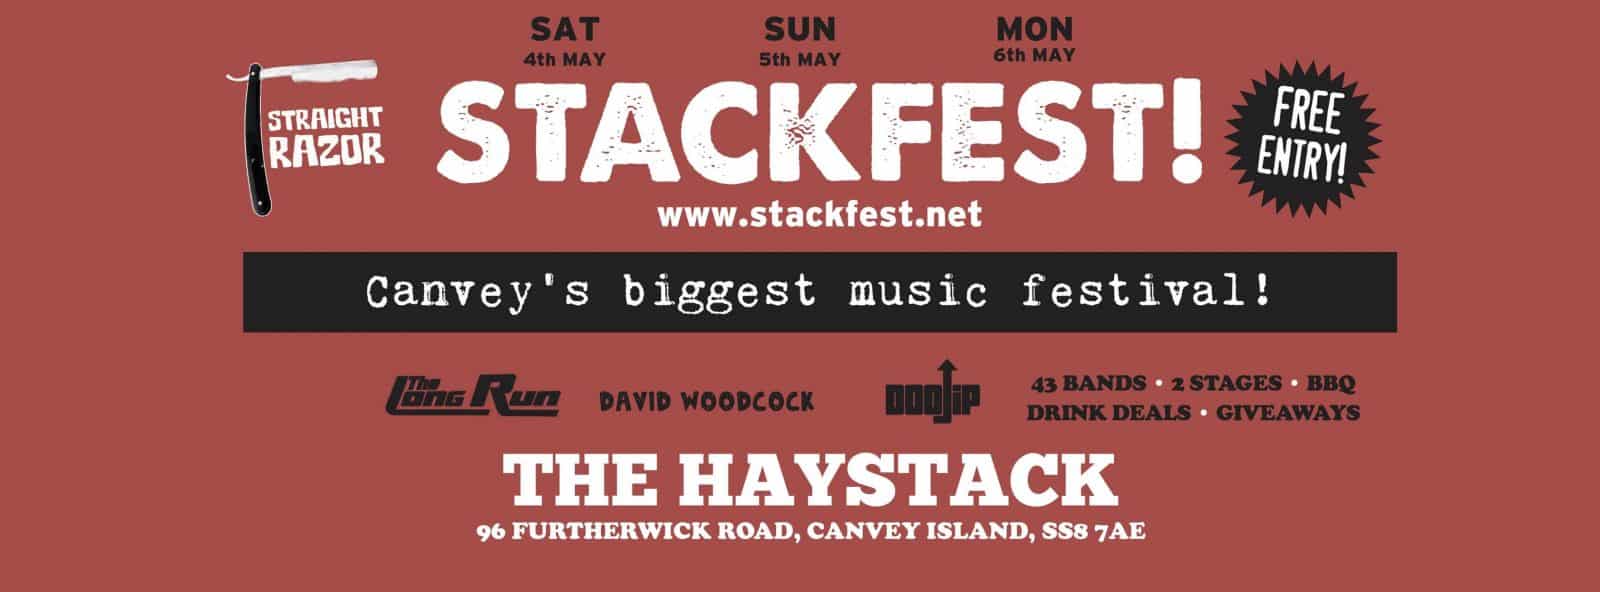 Featured image for “‘Stackfest’: Canvey’s Largest Free Music Festival!”